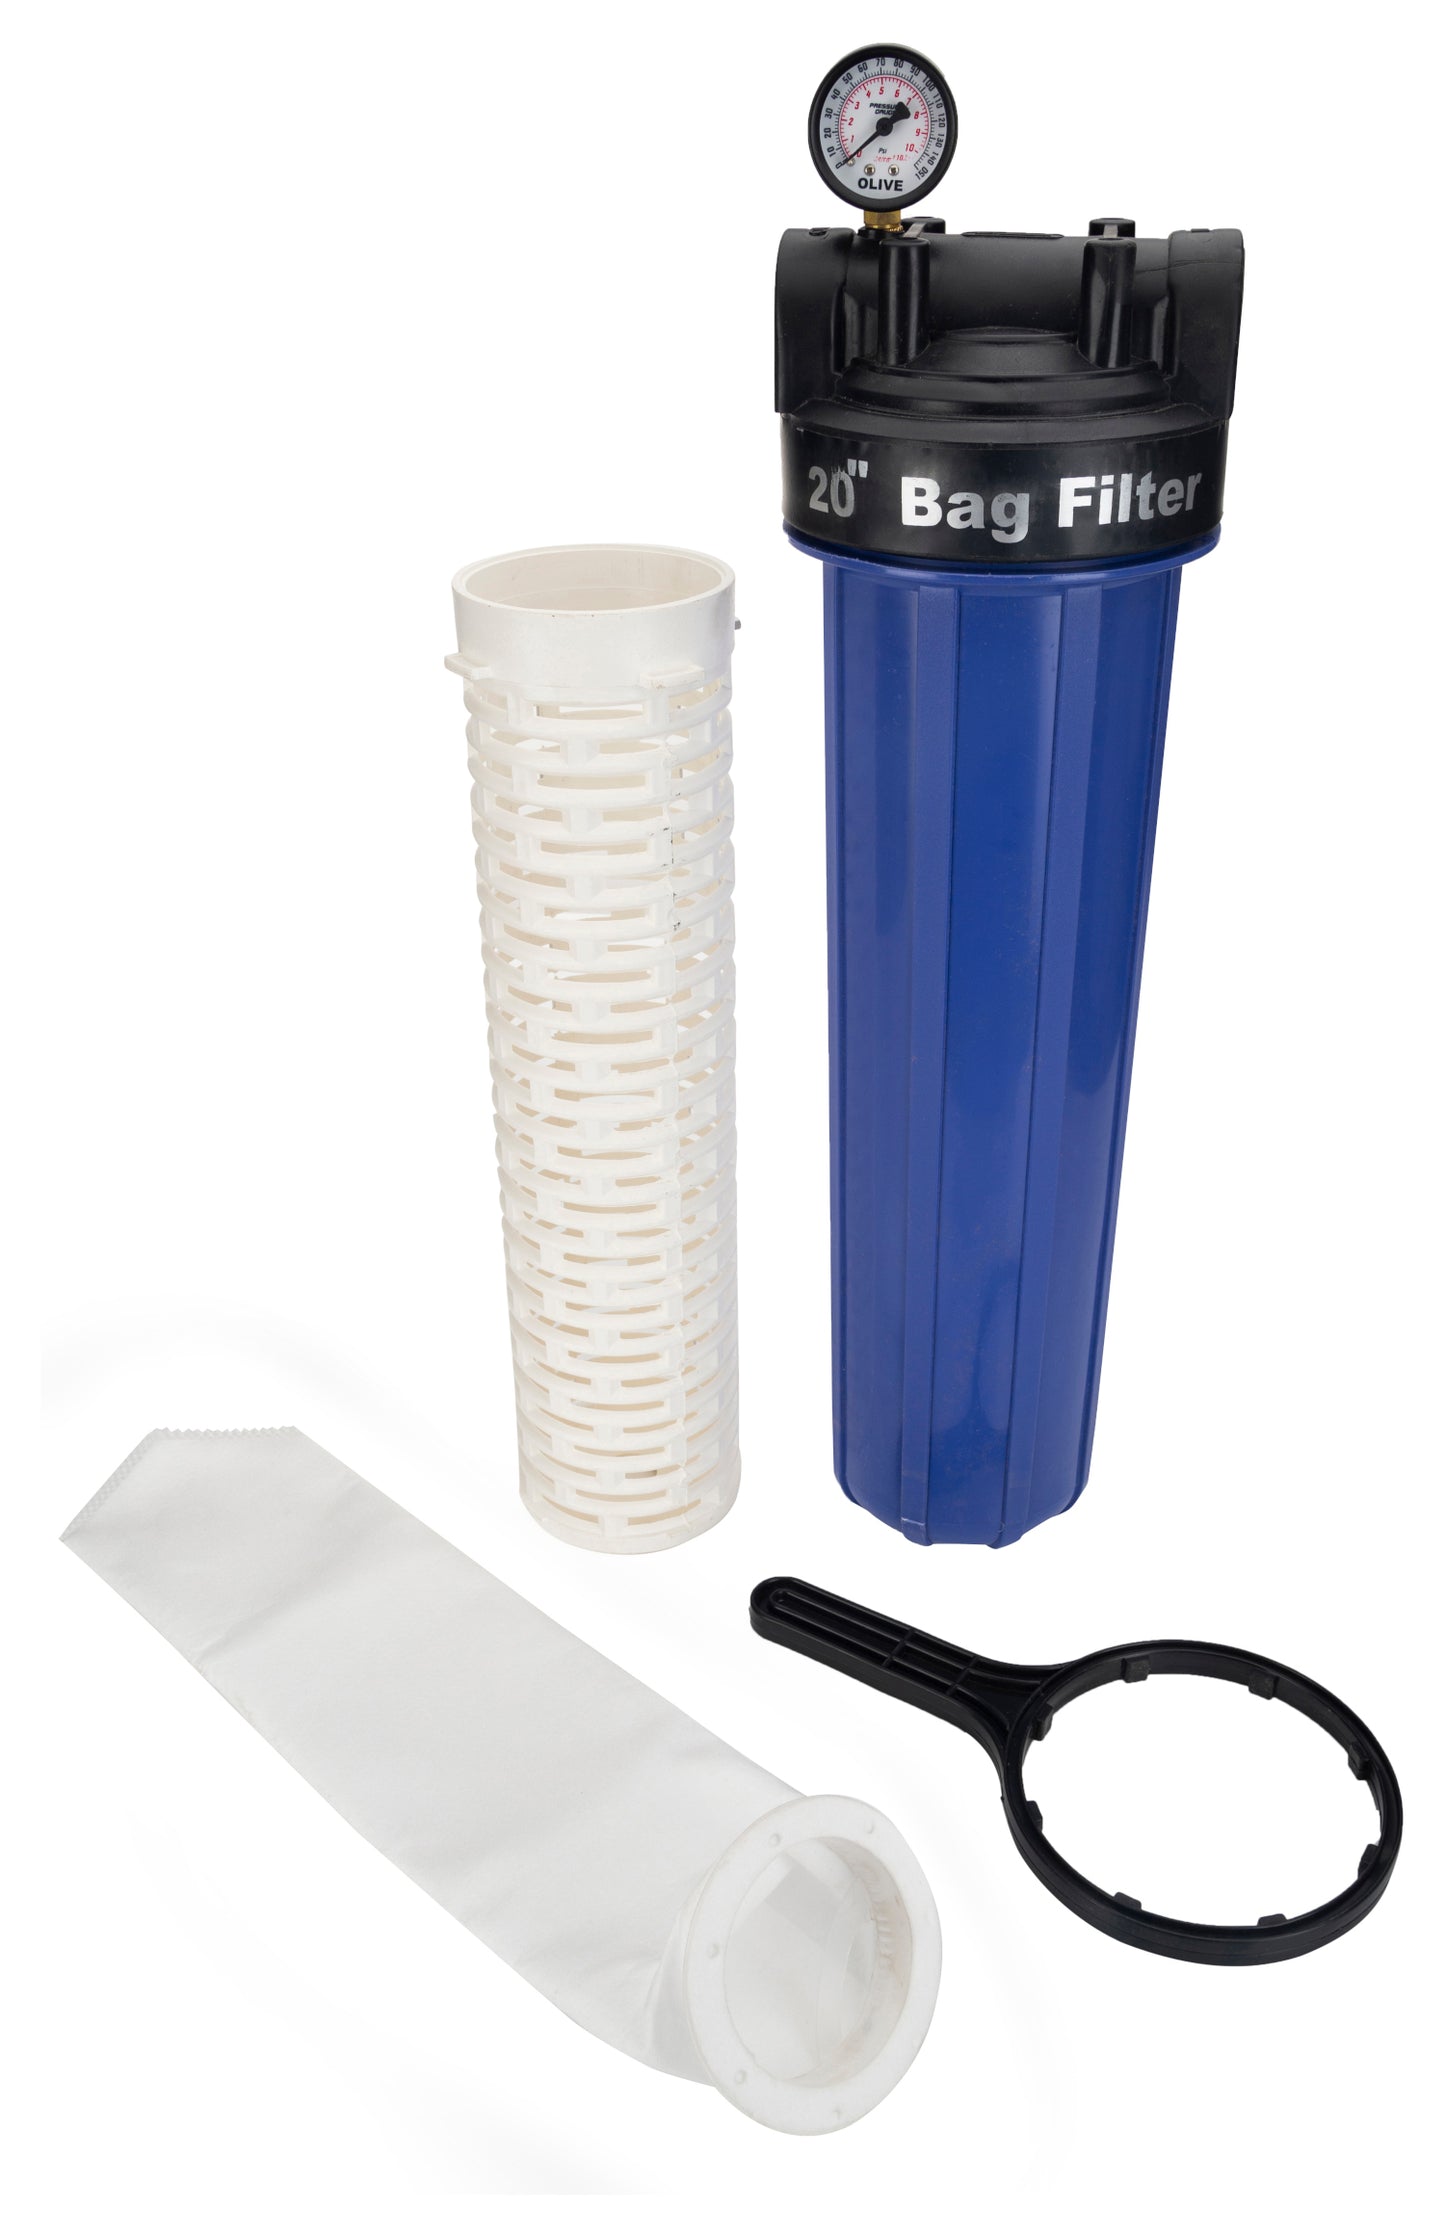 RiverSoft Sediment Filter Assembly AFB-20, Filter Bag 5 Micron for filtering sediments with pressure gauge, Install in mainline 1 inch inlet/outlet (20 inch filter bag, PP).